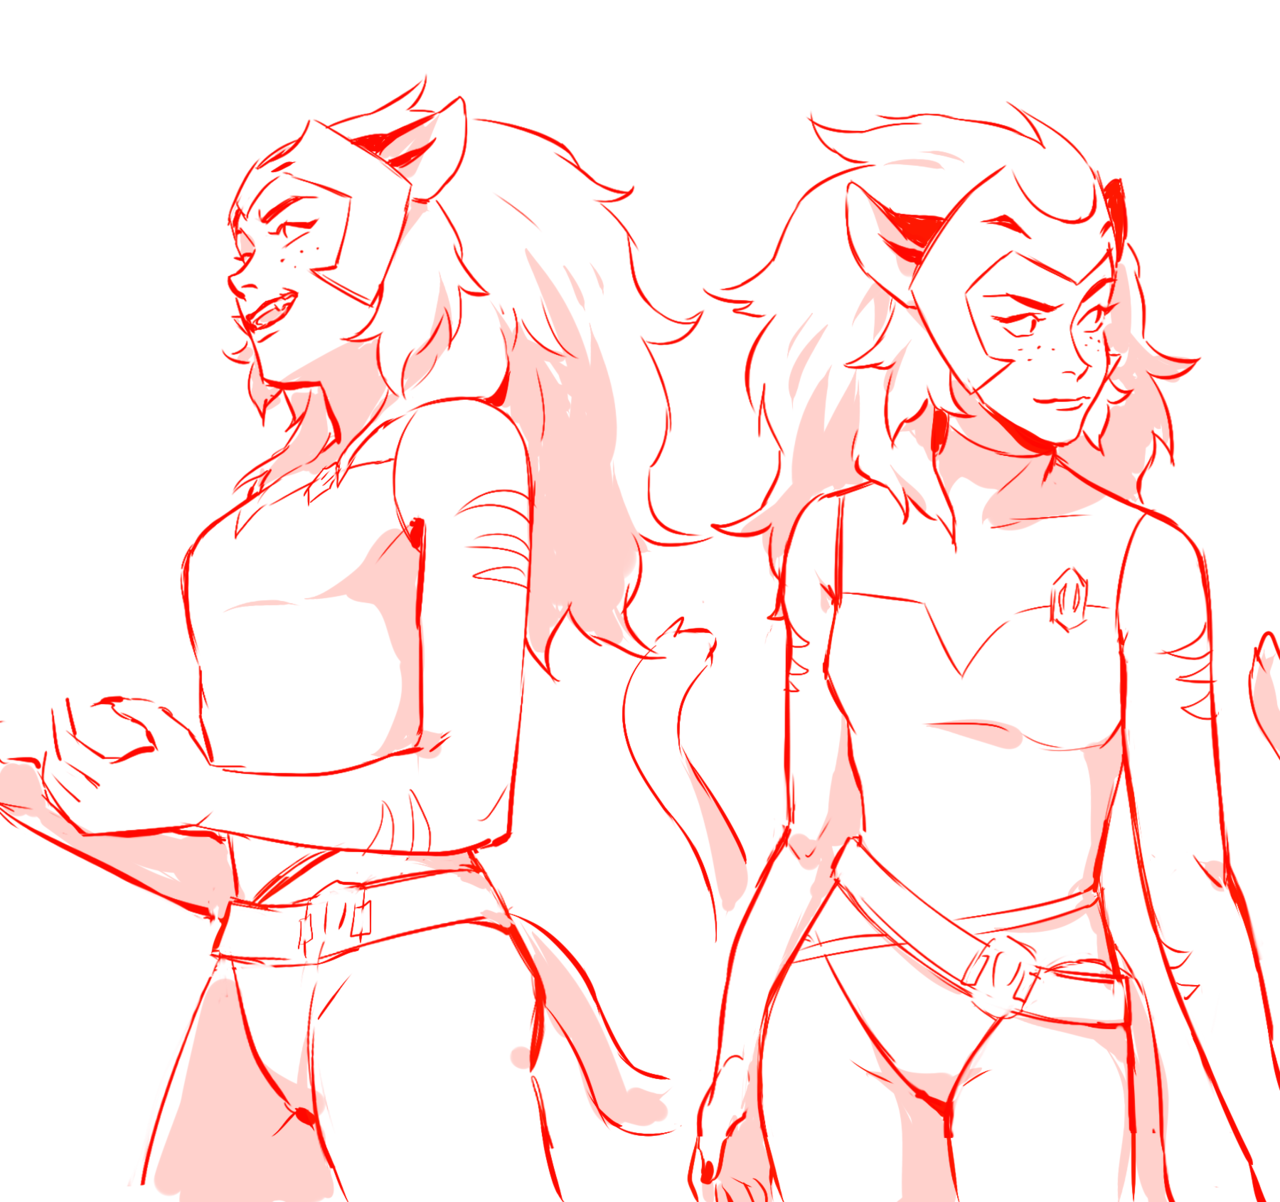 konnahdot: and some she-ra sketches! ill watch s2 as soon as i get the time! :’D